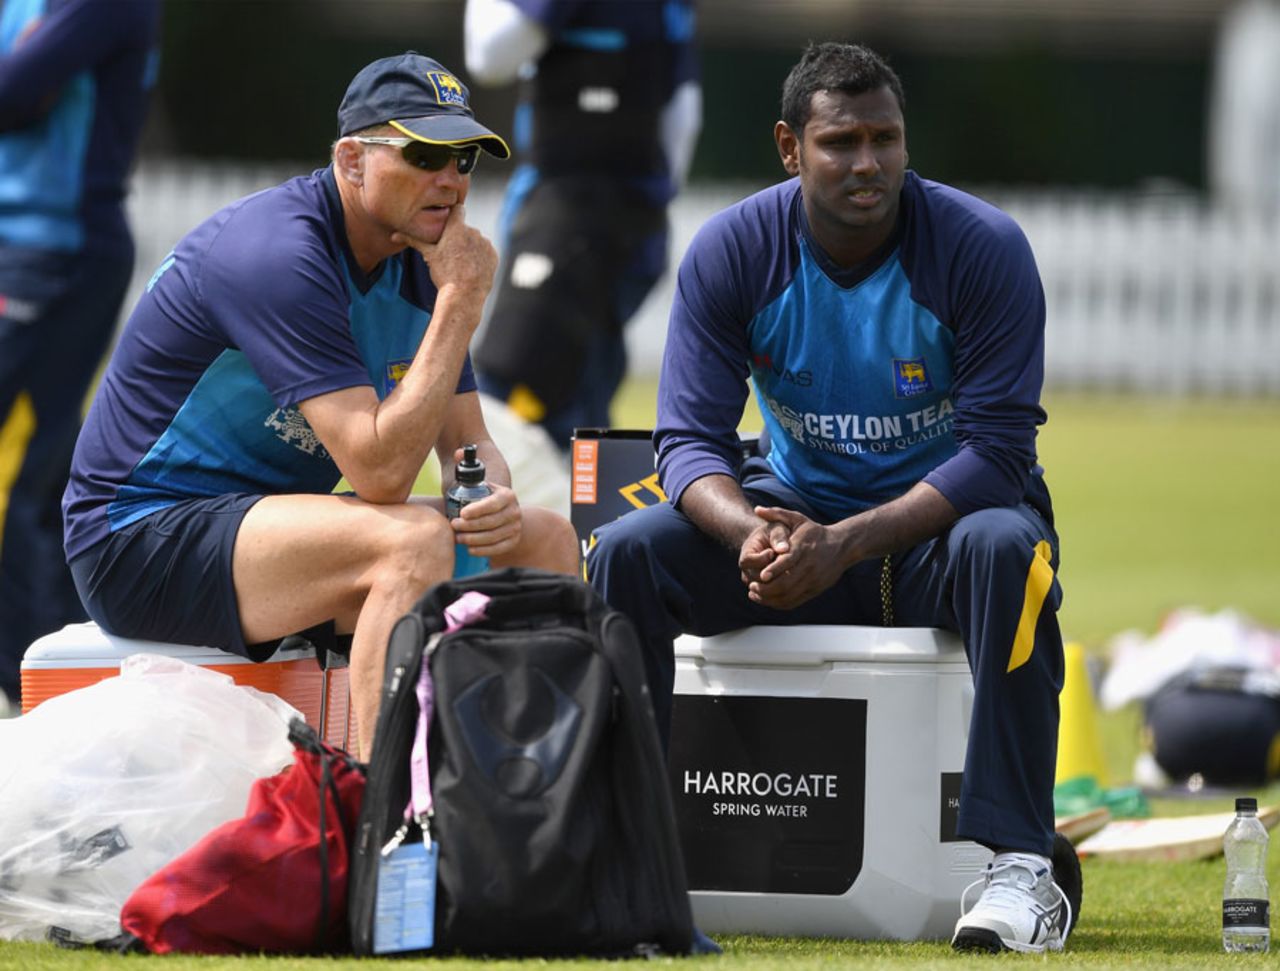 Graham Ford and Angelo Mathews take some time out, Lord's, June 7, 2016